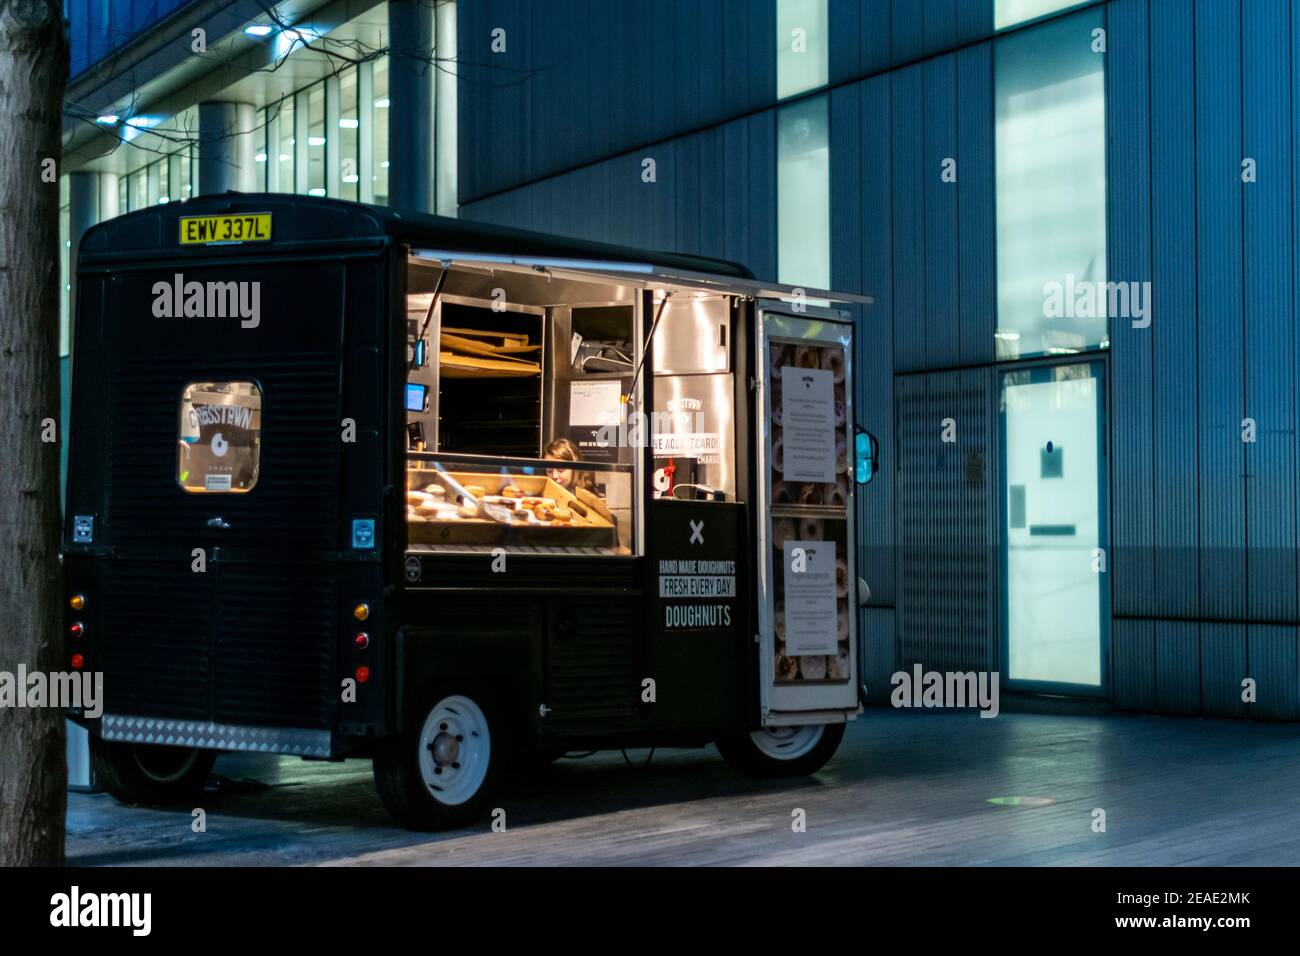 London, UK- 15 Dec 2020: Dognut food truck parked in central London nearby of the Shard building. Young girl waiting for customers to sell donuts in a Stock Photo